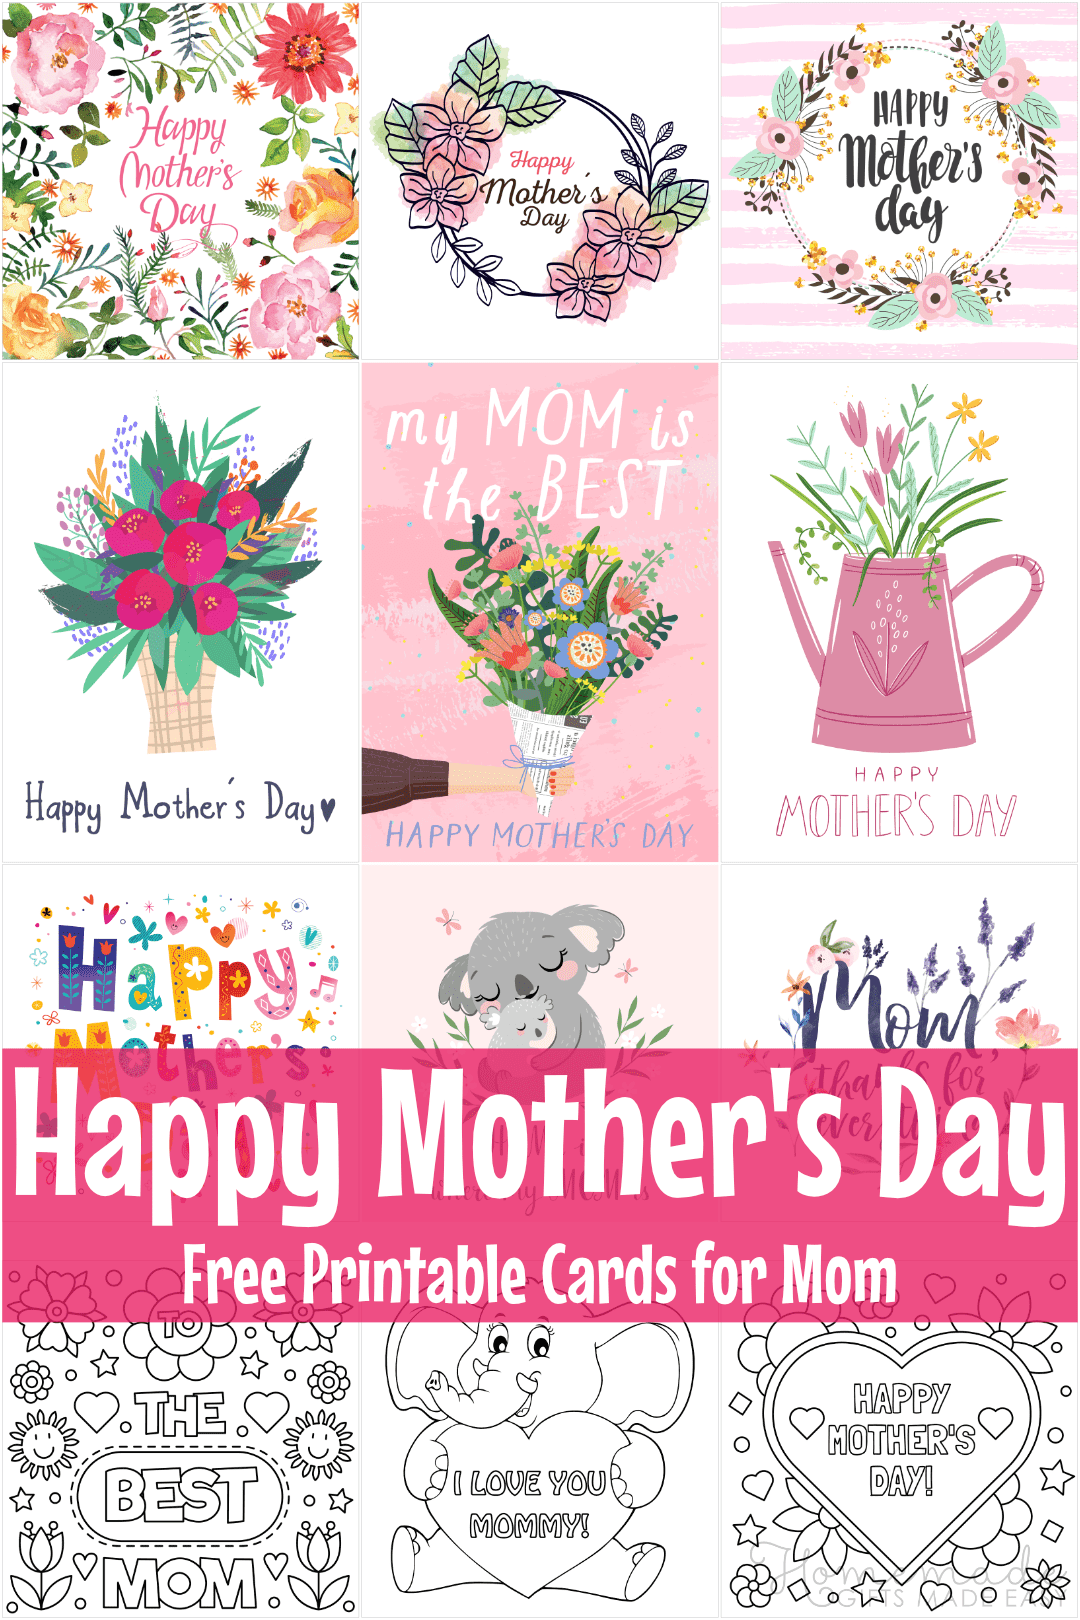 12-lovely-printable-mother-s-day-cards-to-give-your-mom-complete-with